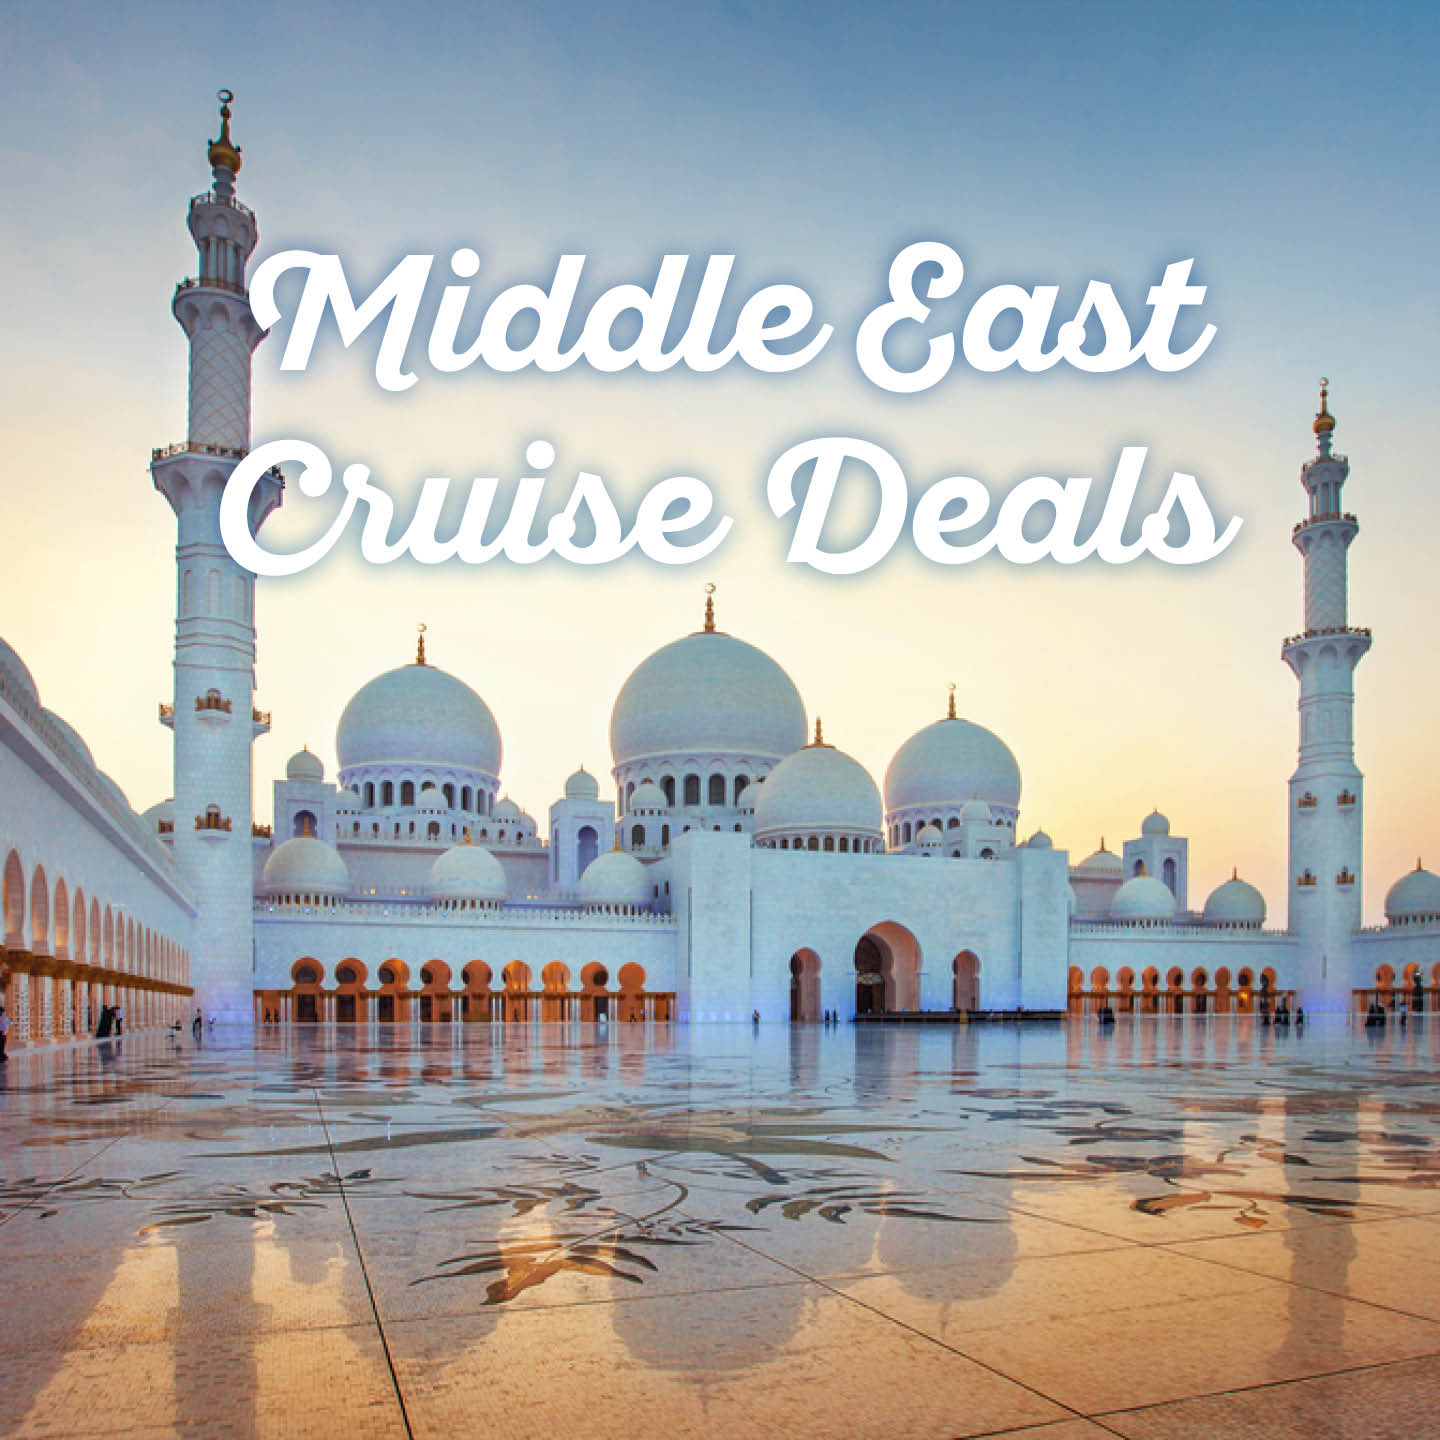 middle-east-cruise-deals-1-thumb.jpg